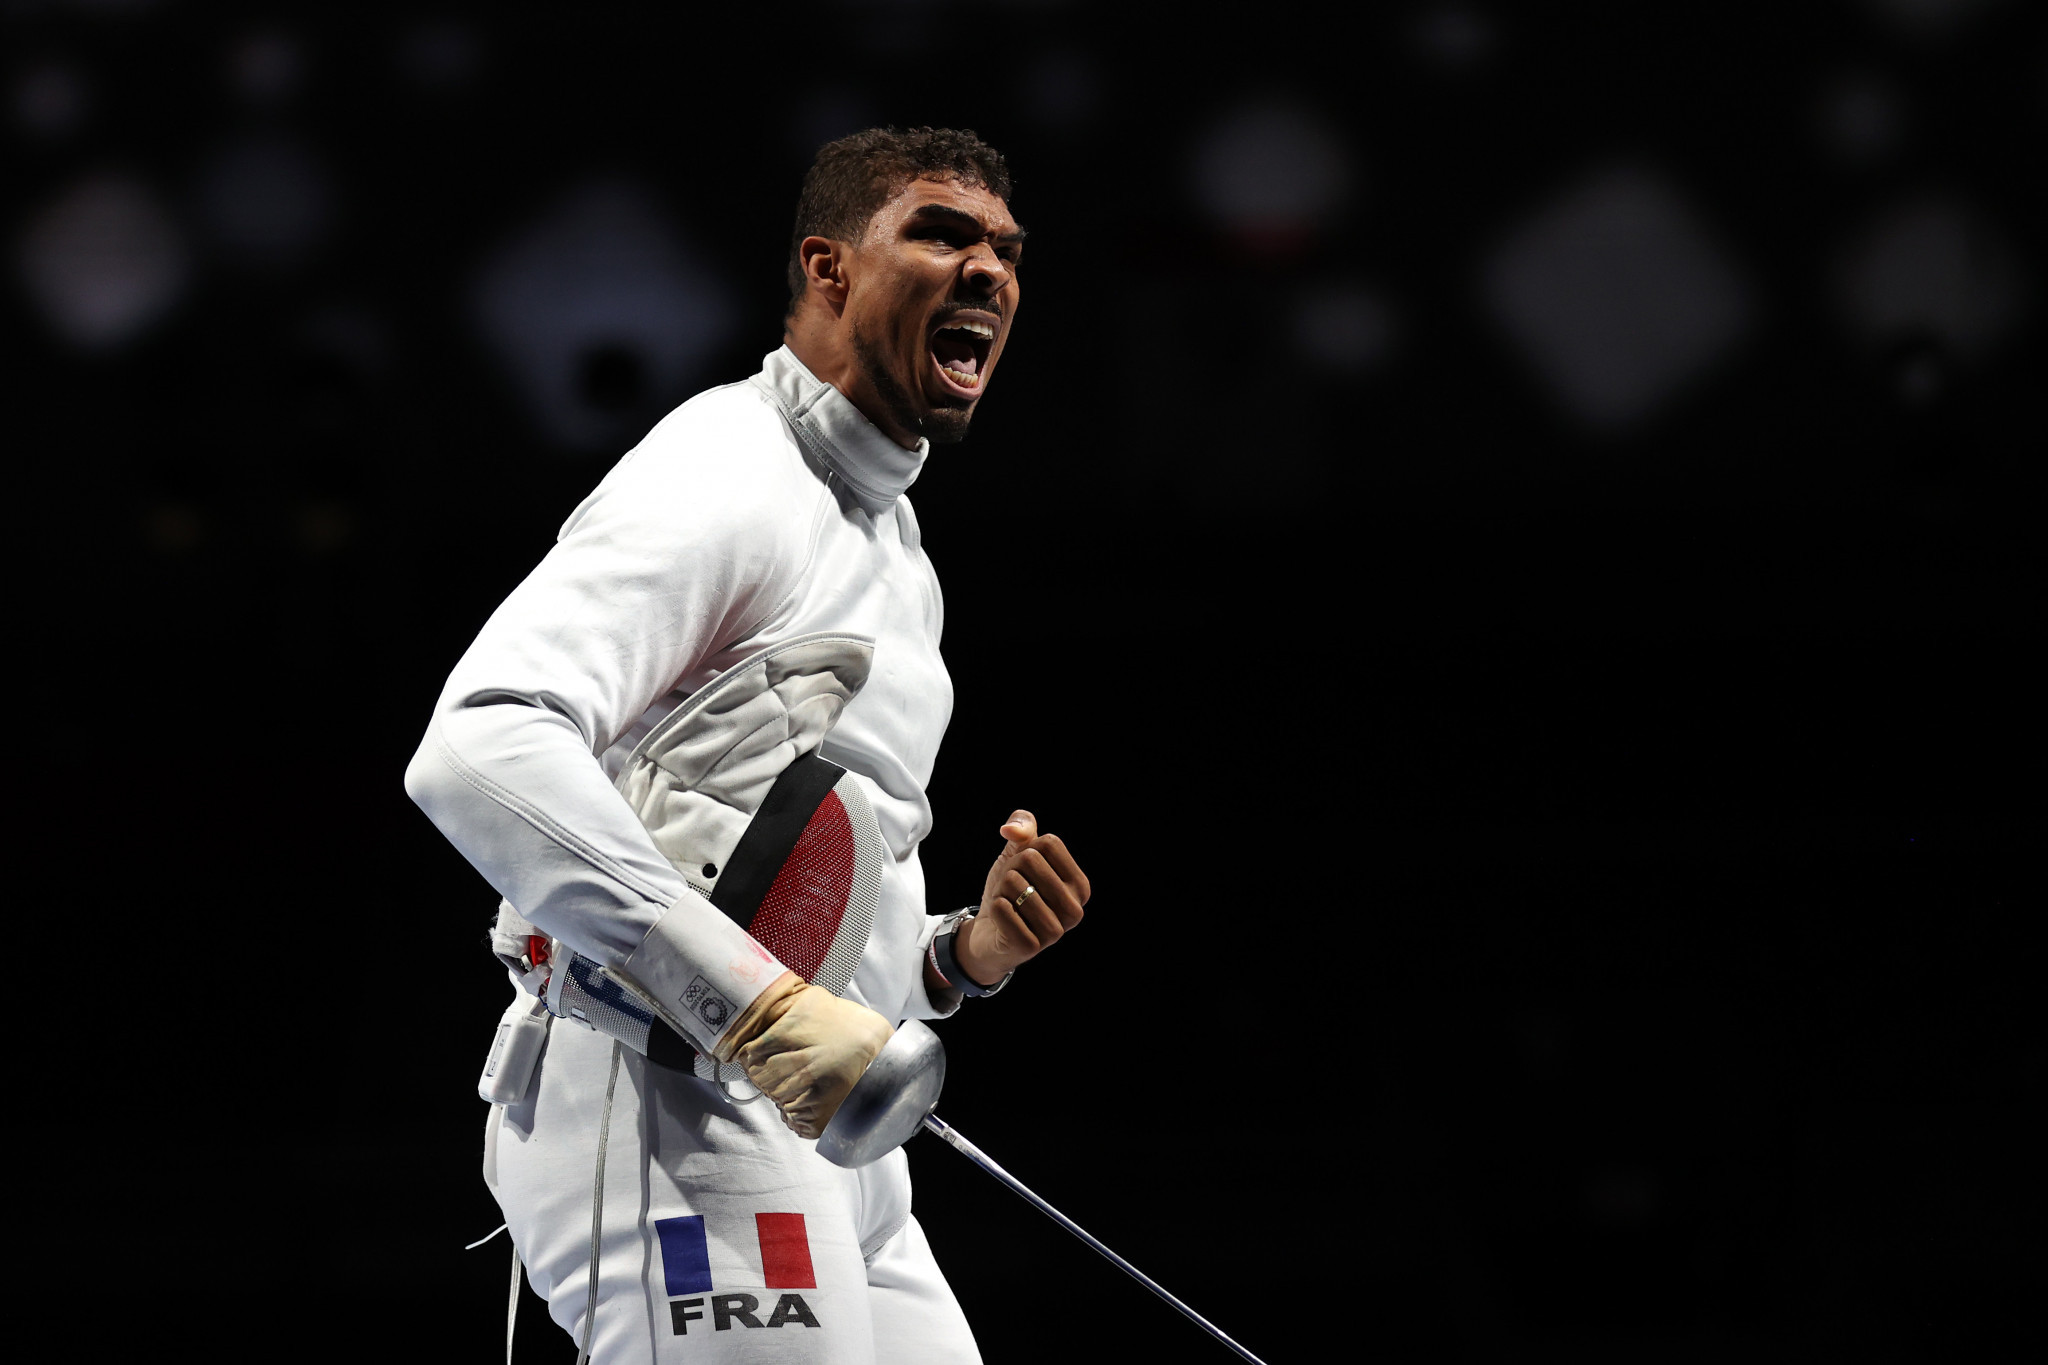 Olympic gold medallist Borel and Lehis victorious at FIE Grand Prix in Qatar